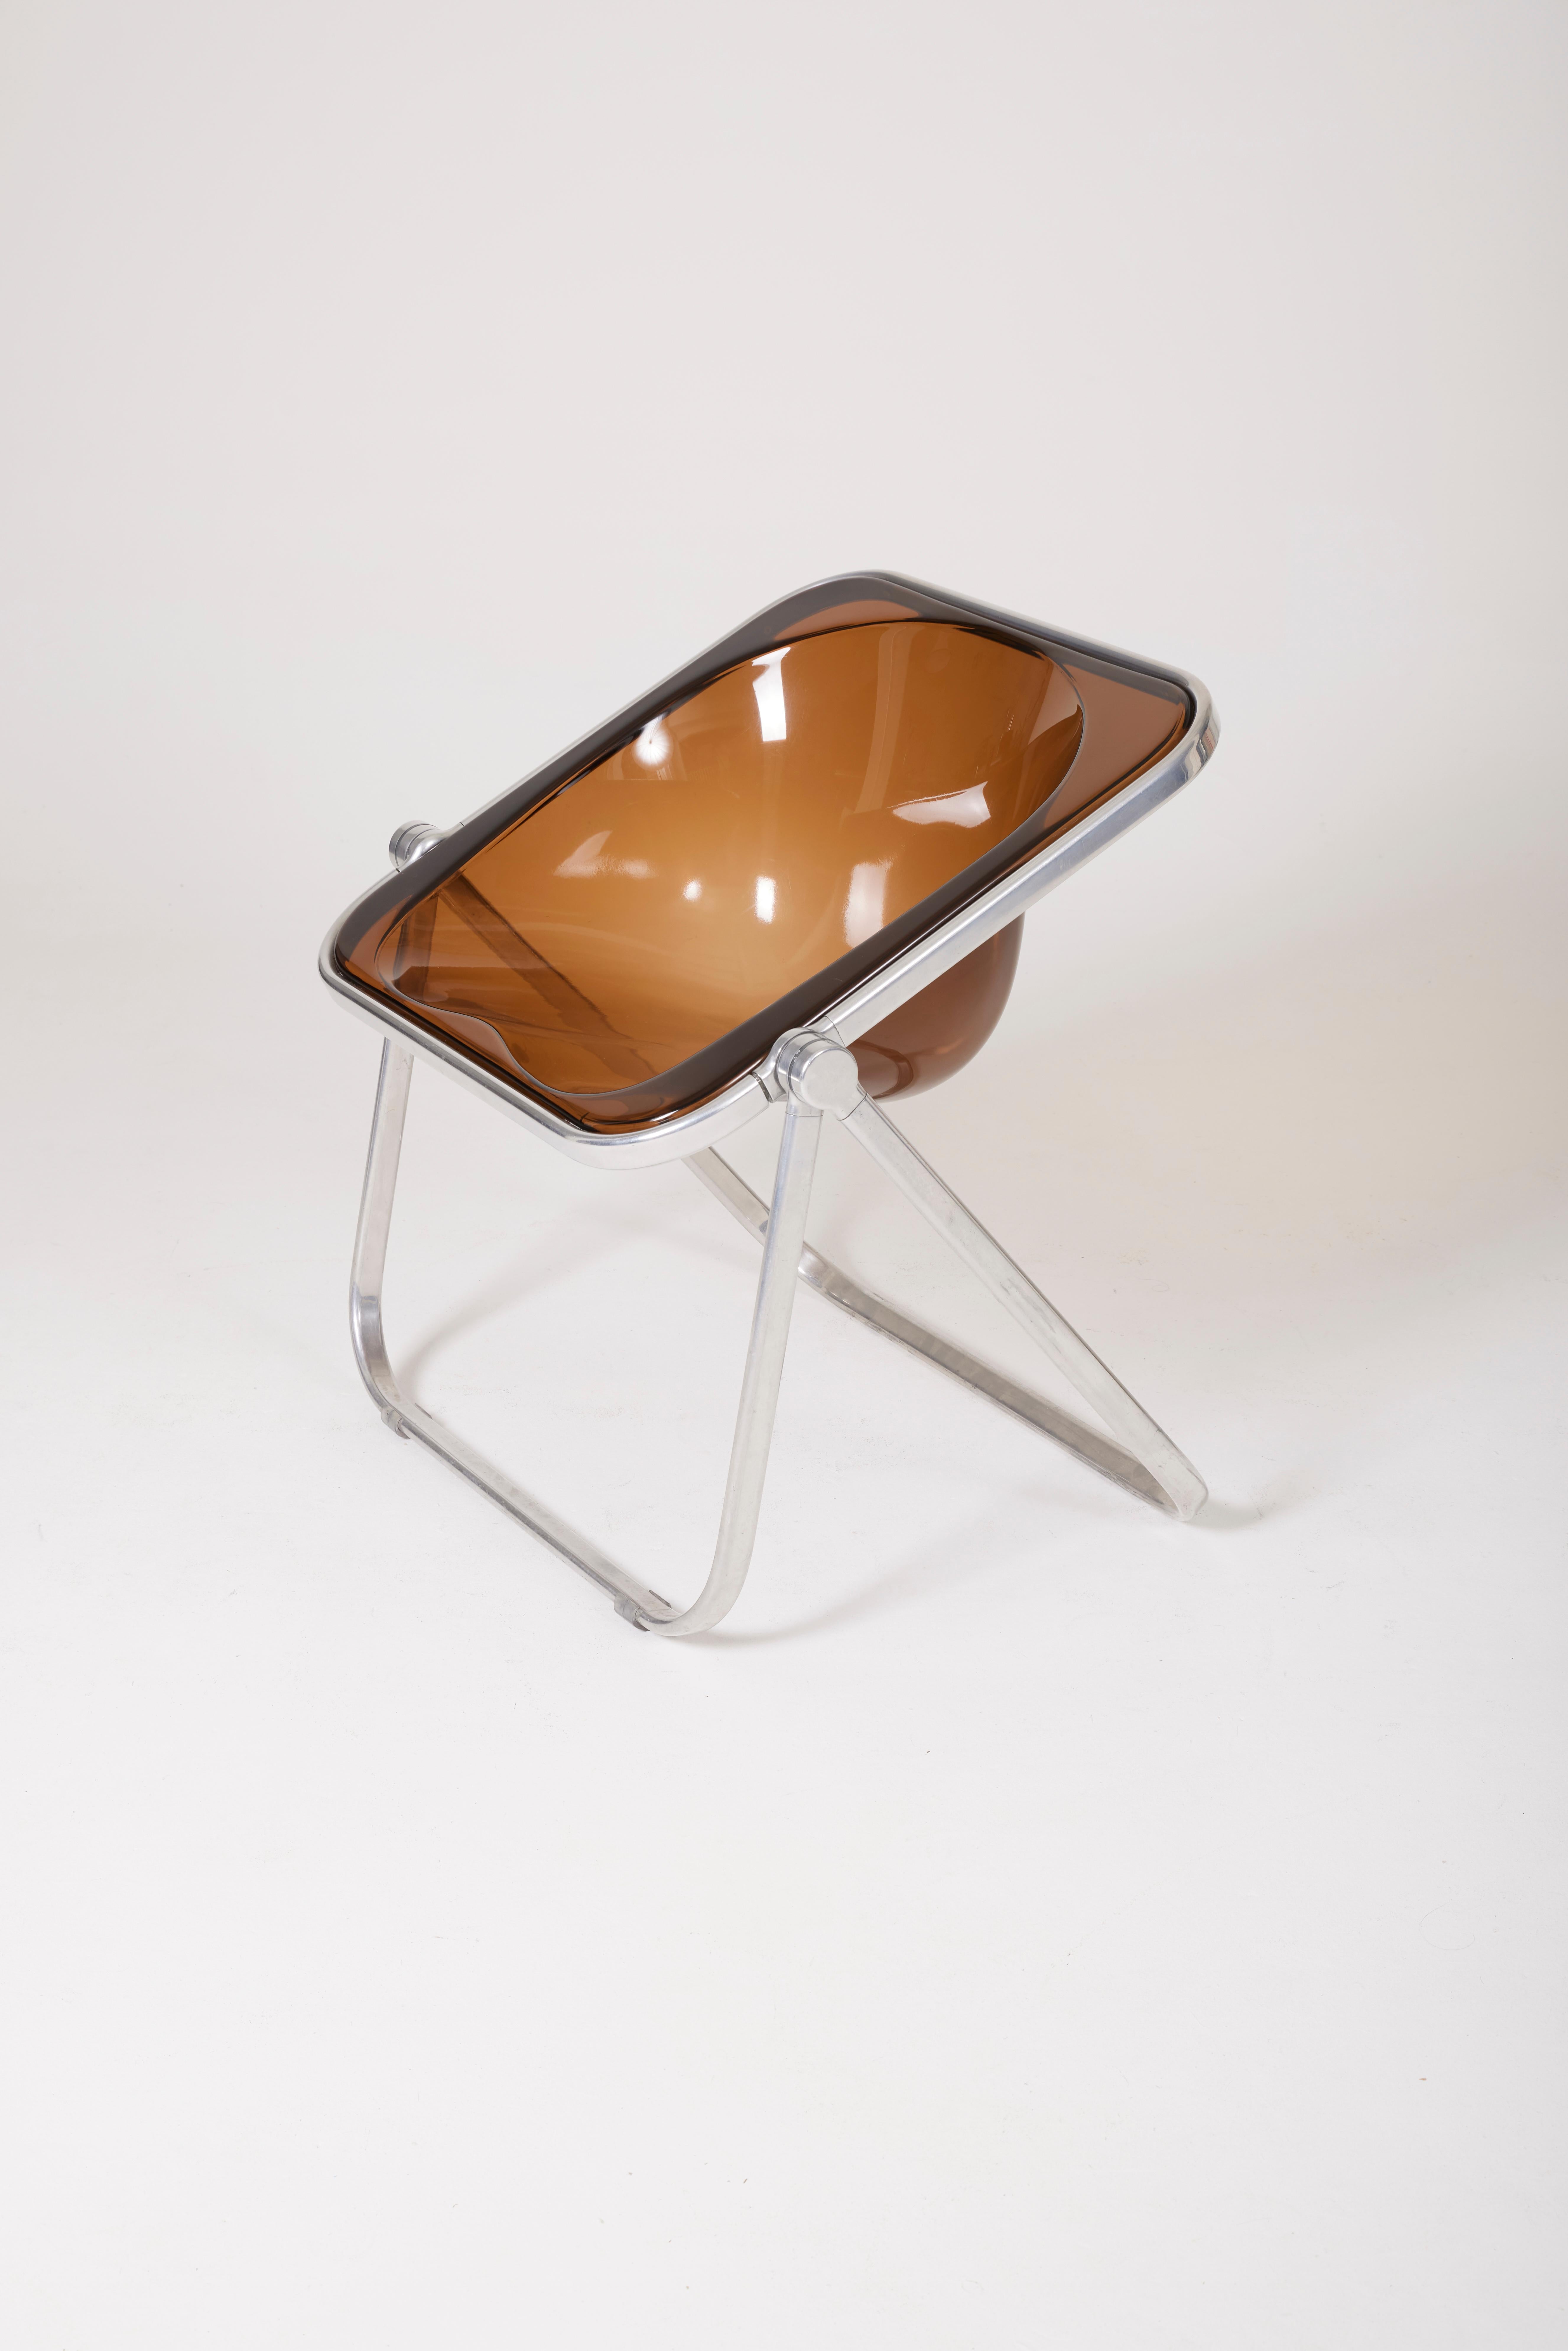 Plona armchair by Giancarlo Piretti for Castelli, dating from the 1970s. Polished aluminum frame and smoked methacrylate shell. Very rare in this condition. 5 chairs available.
LP1837-1838-1839-1840.